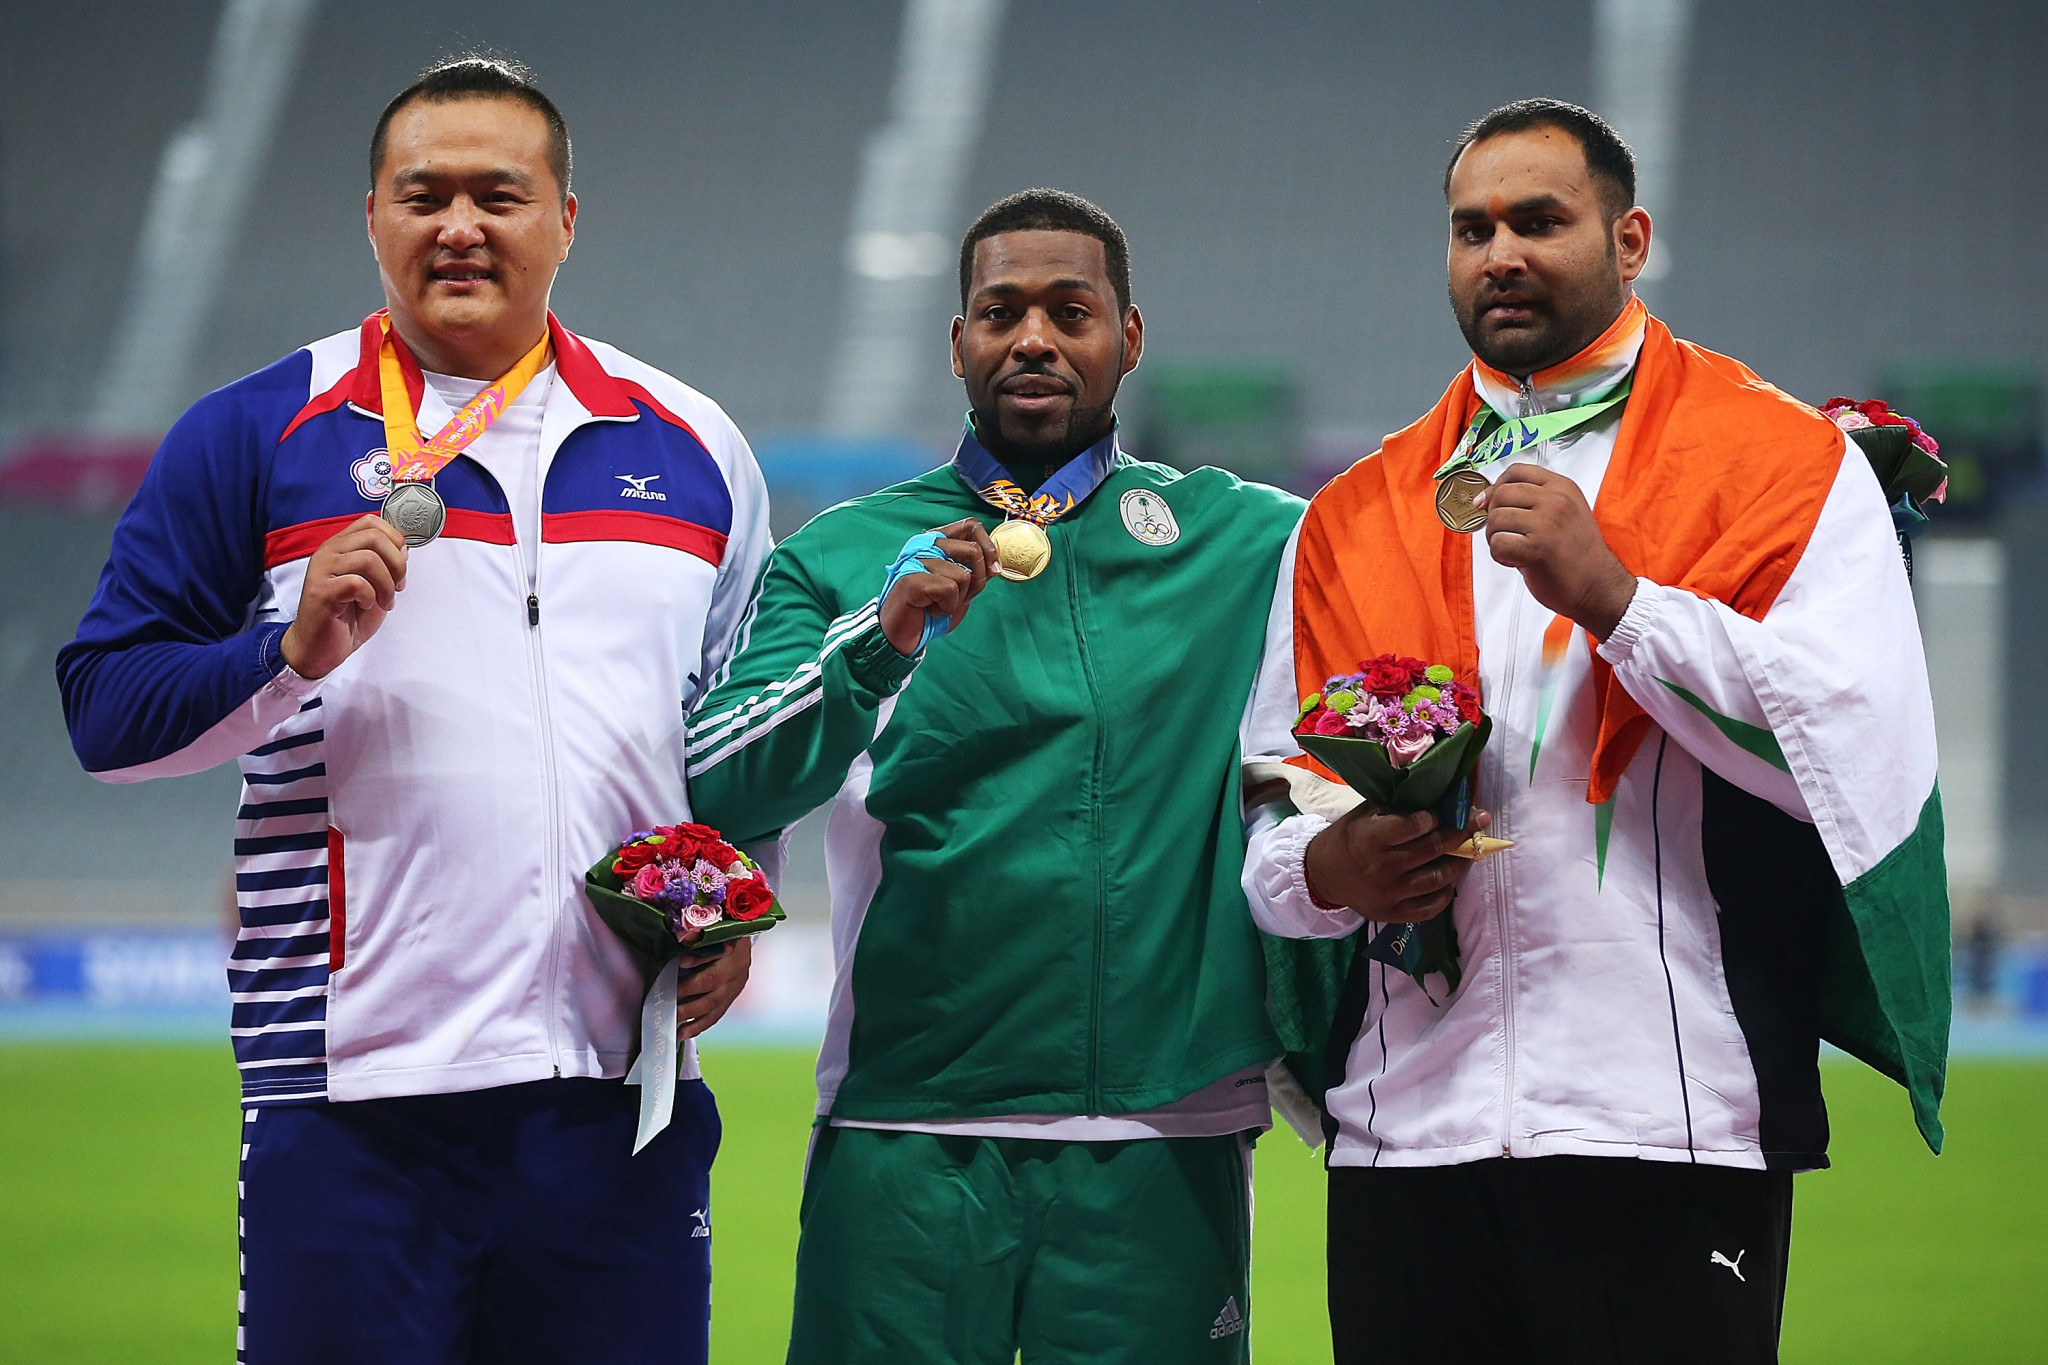 Inderjeet Singh, right, won a bronze medal at the 2014 Asian Games ©Getty Images